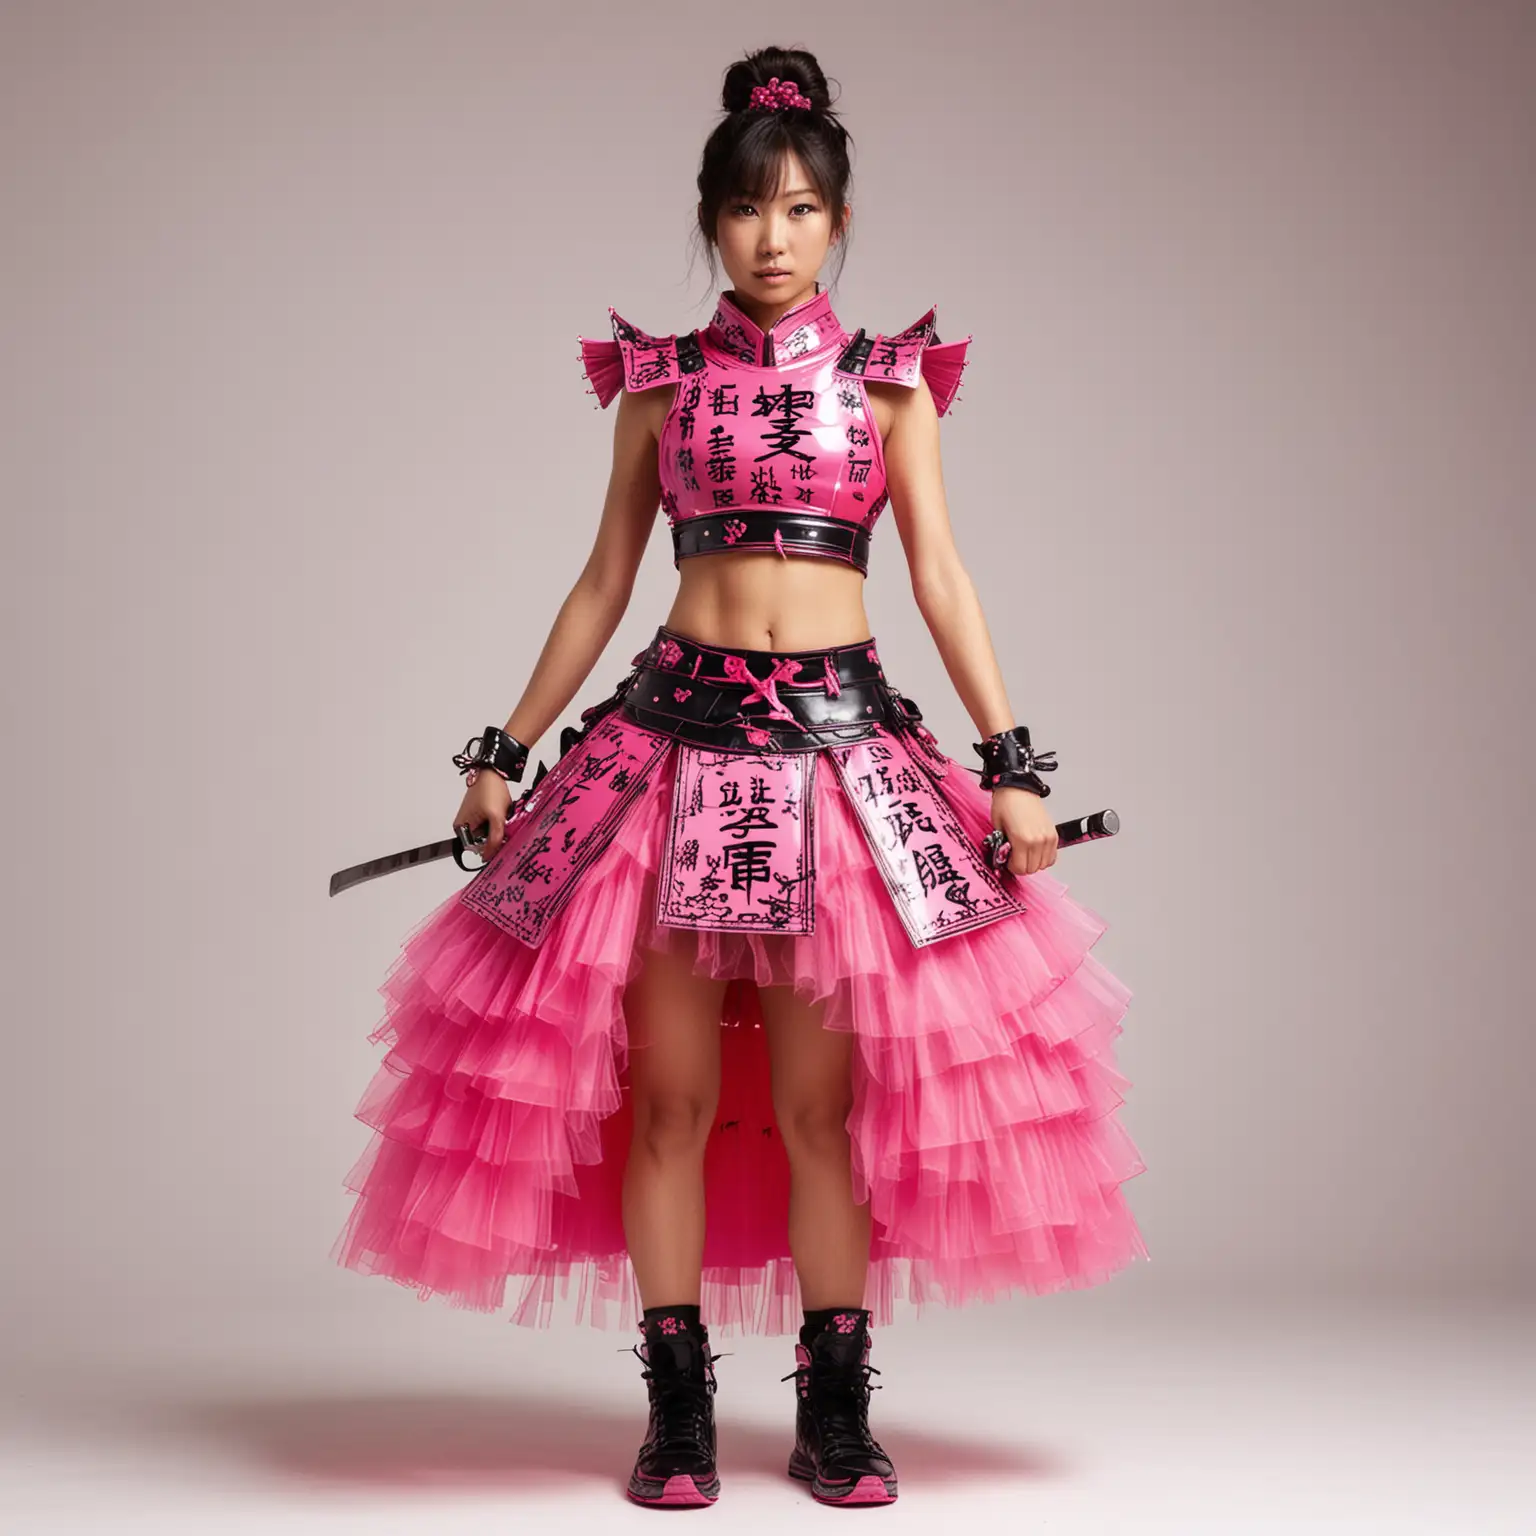 Standing full body view, strong toned beautiful Japanese supermodel in sleeveless, hot-pink samurai-knight armor with black chinese writing, midriff exposed, giant hot-pink spikey tutu, black sneakers, sneakers, white background